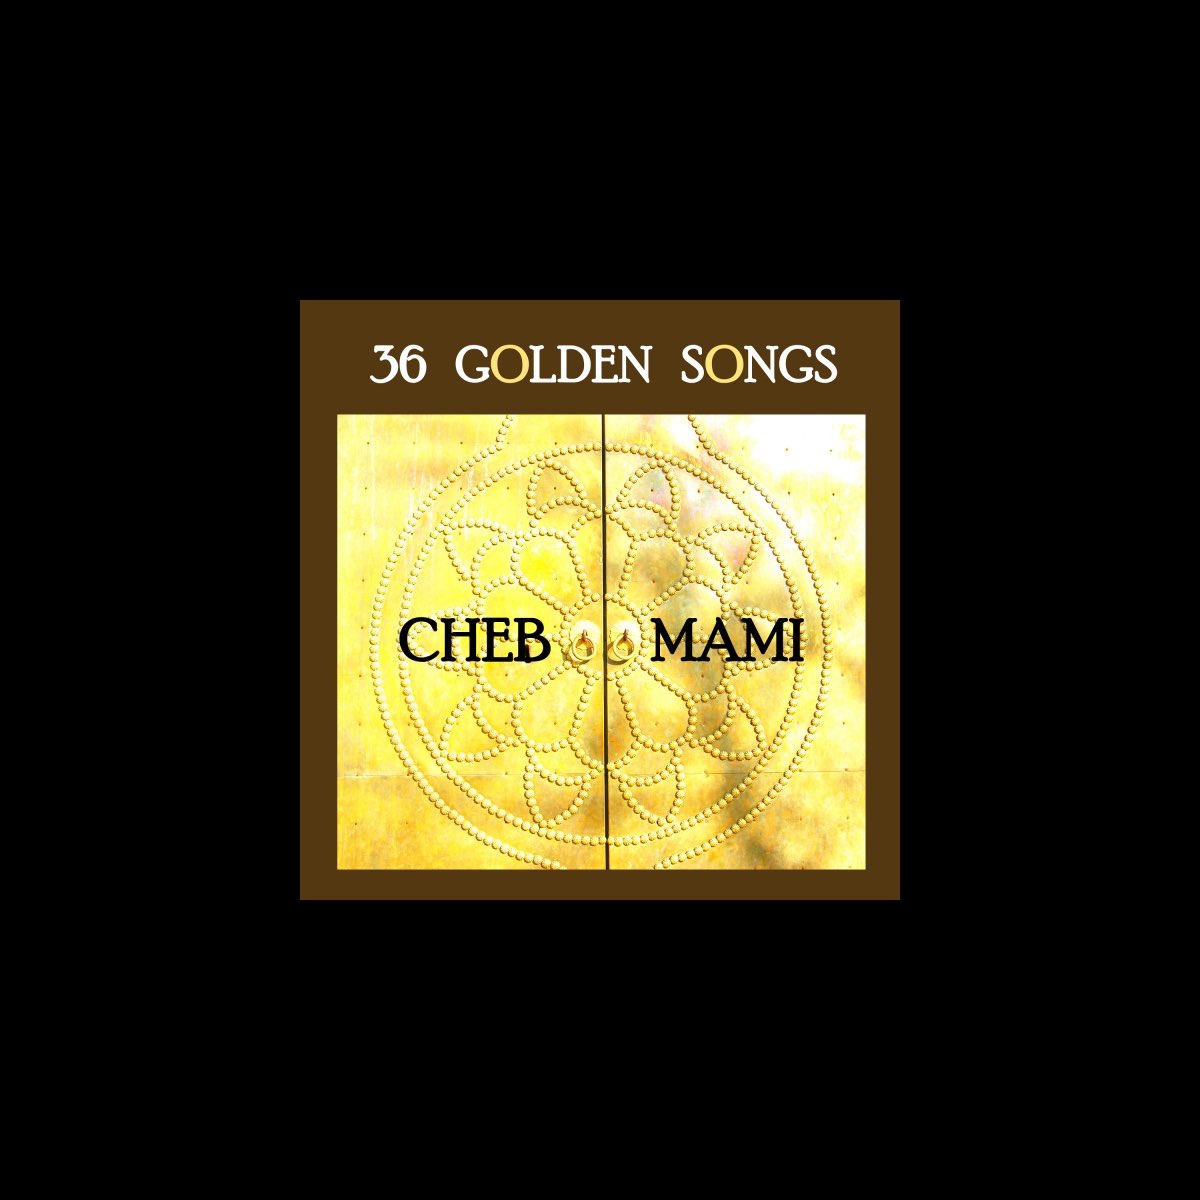 36 Golden Songs of Cheb Mami by Cheb Mami & Jérémie Rhorer on Apple Music